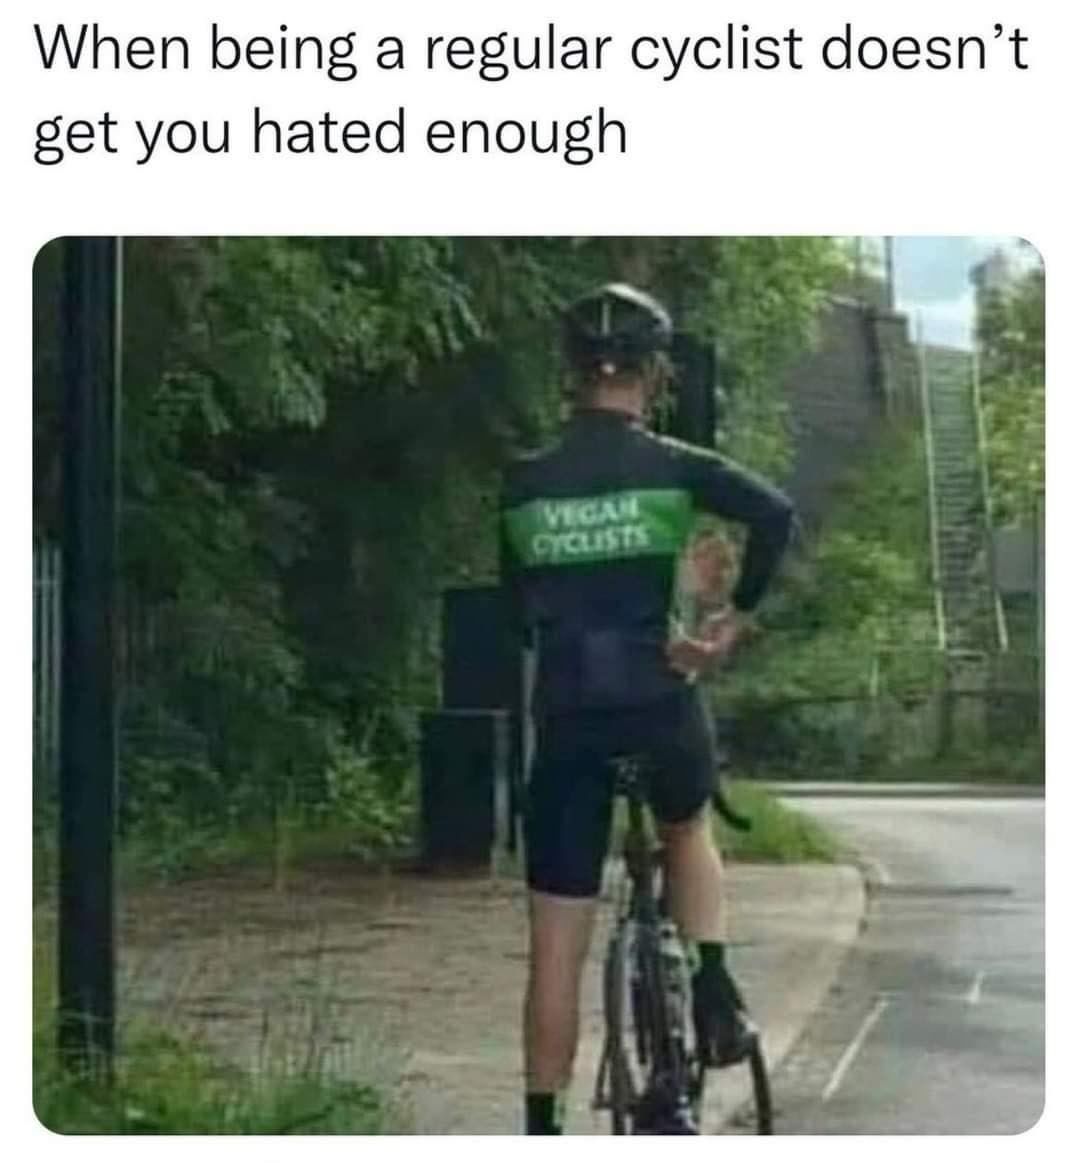 When being a regular cyclist doesn't get you hated enough.